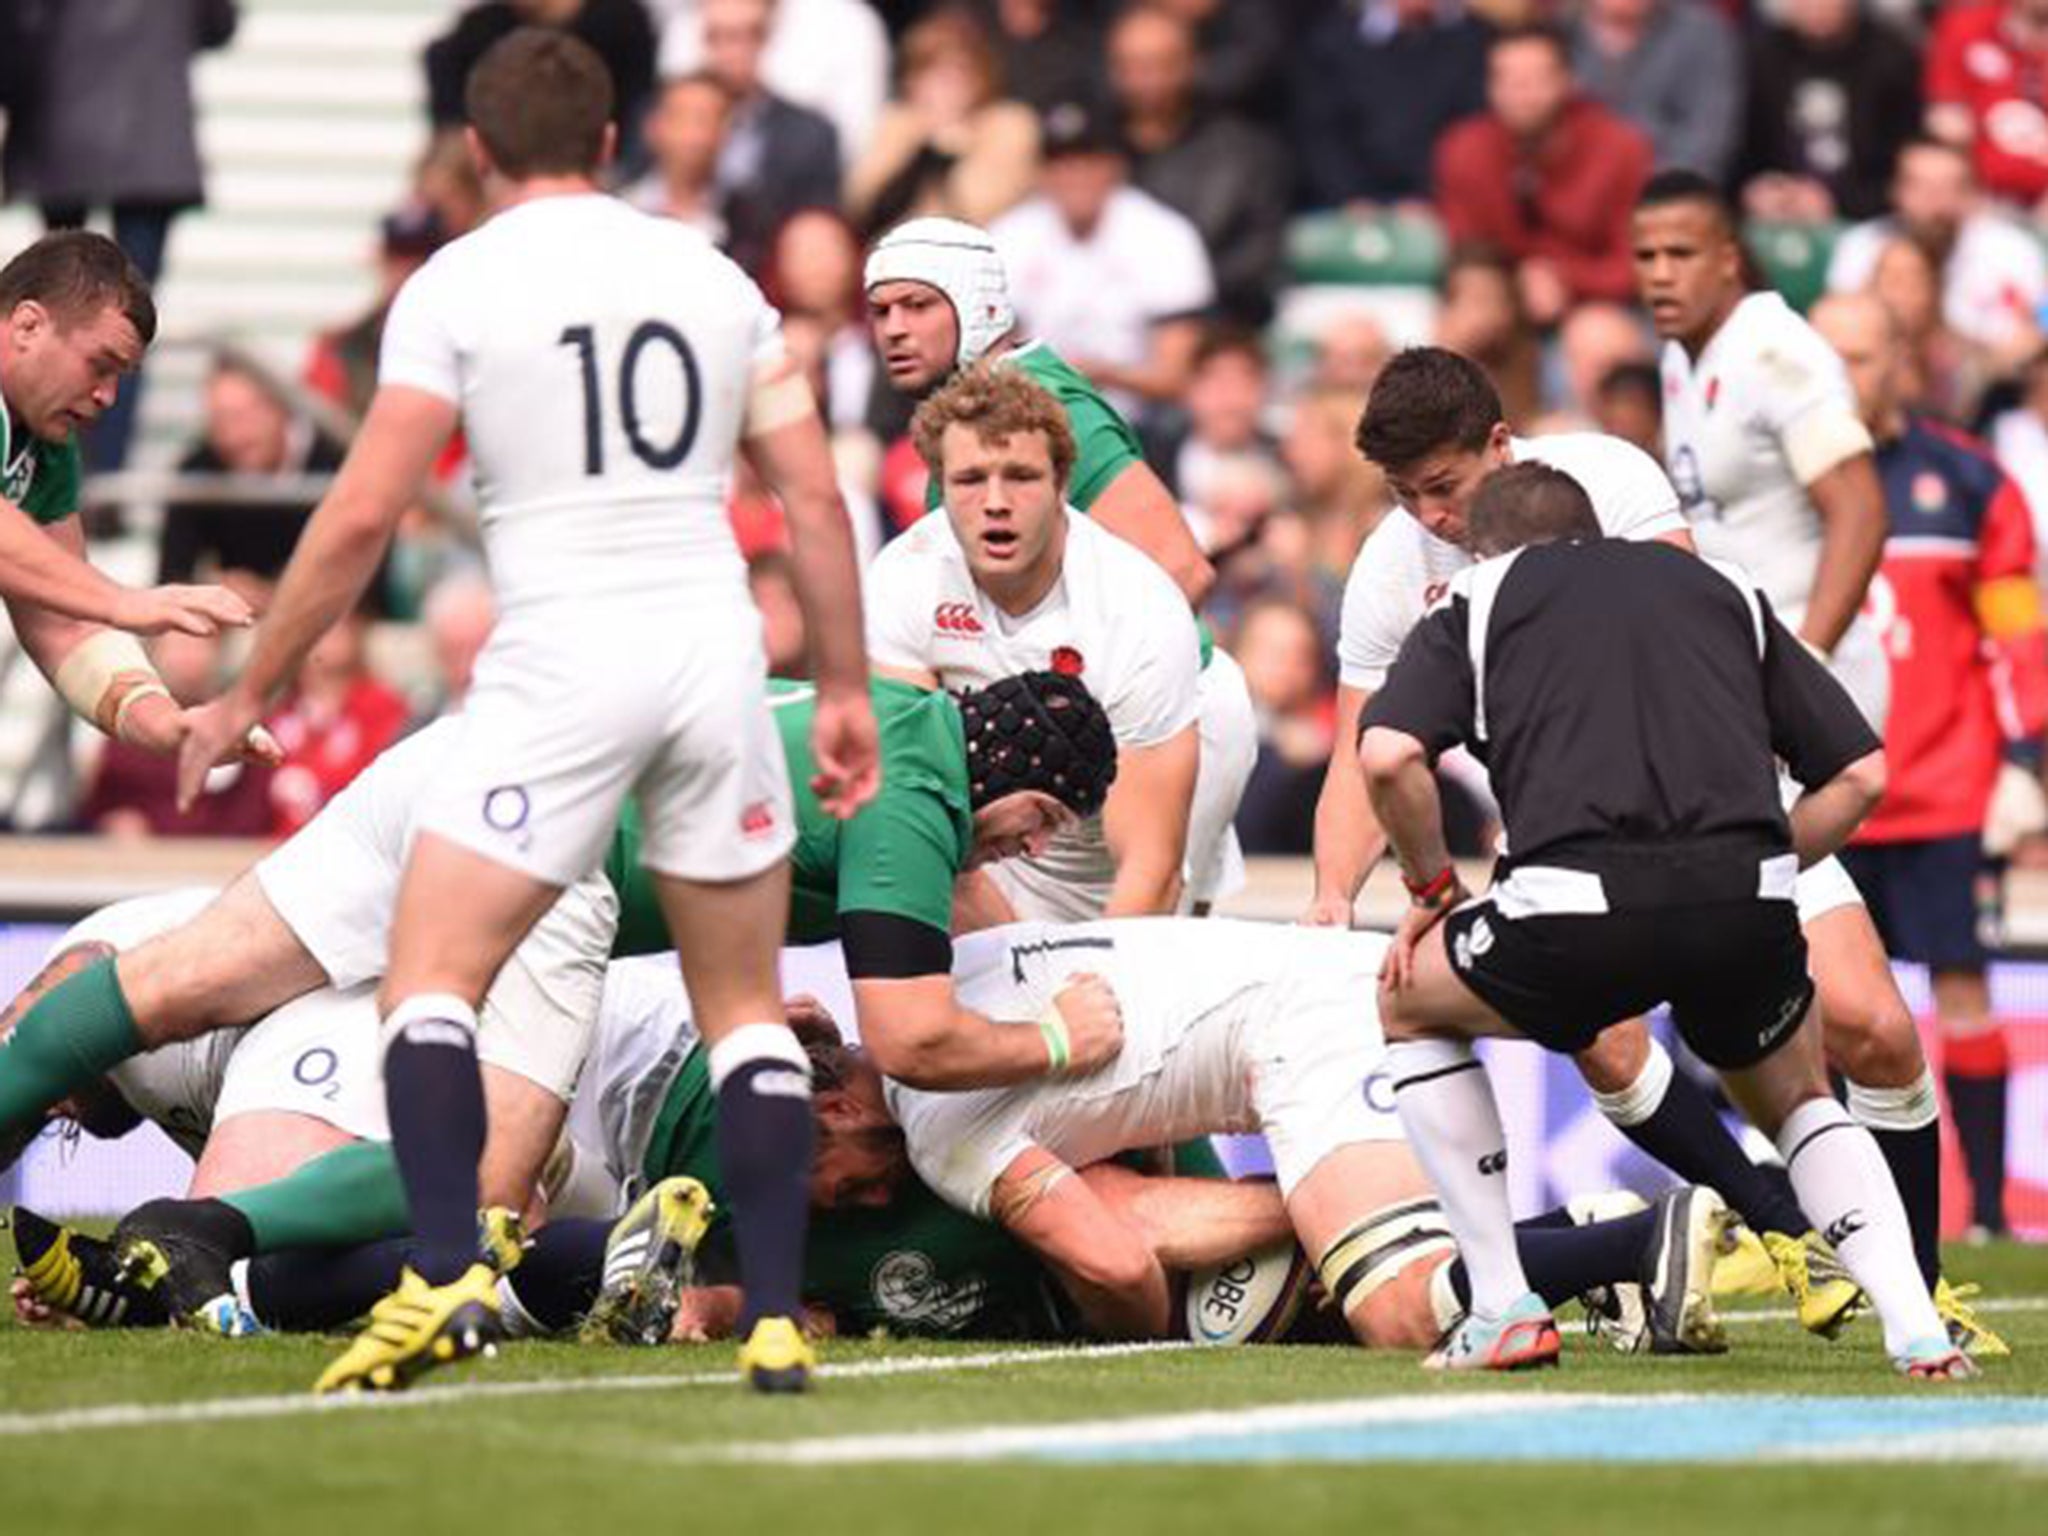 Paul O'Connell got a try back for the Irish early in the second-half